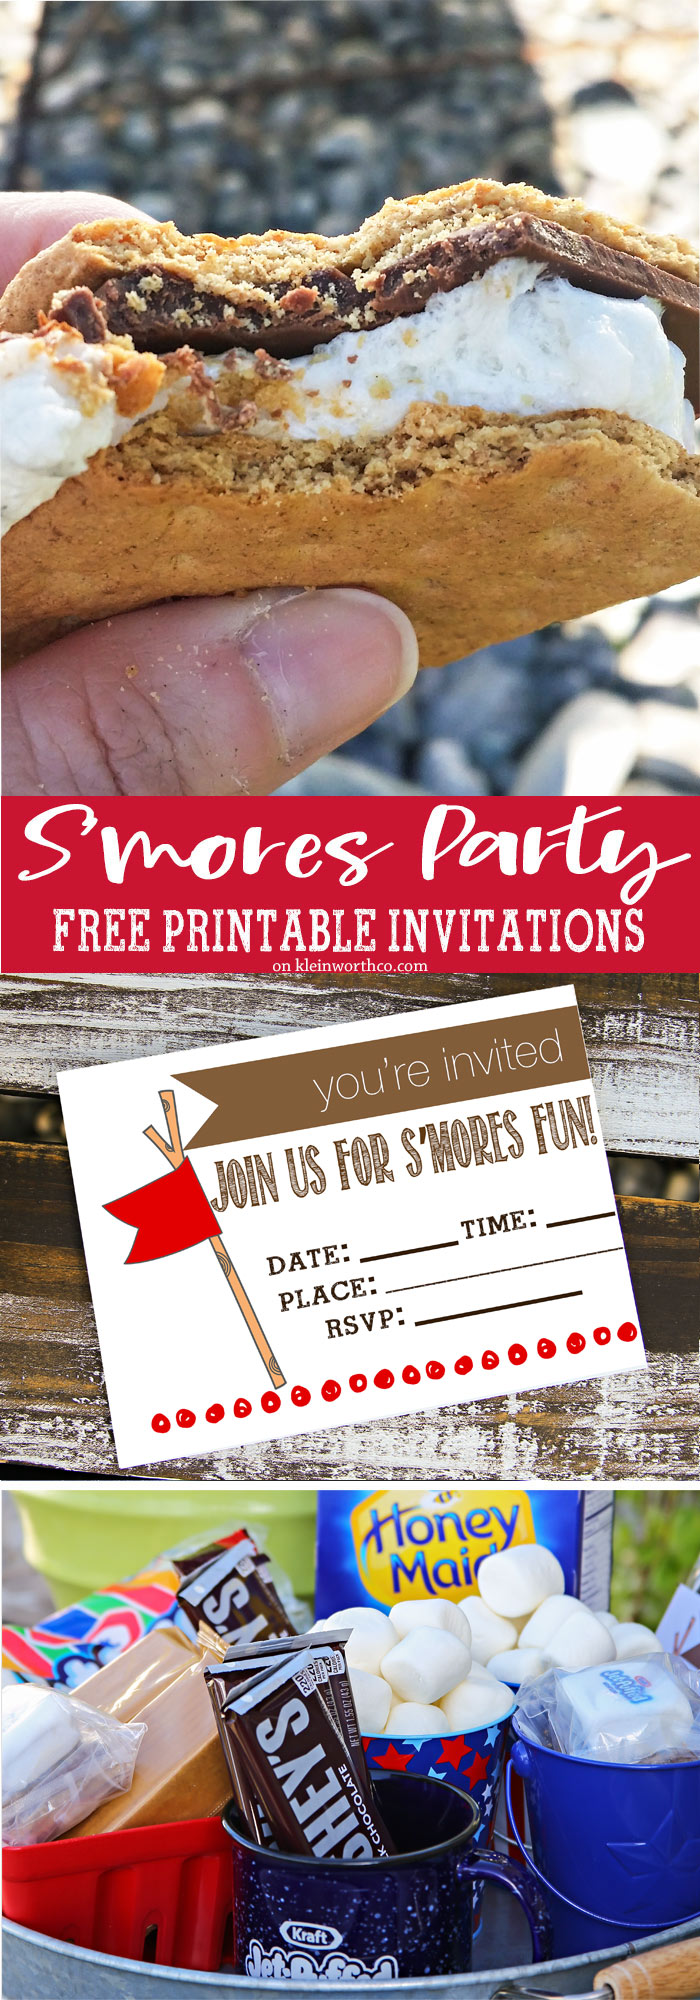 S'Mores Party Free Printable Invitation